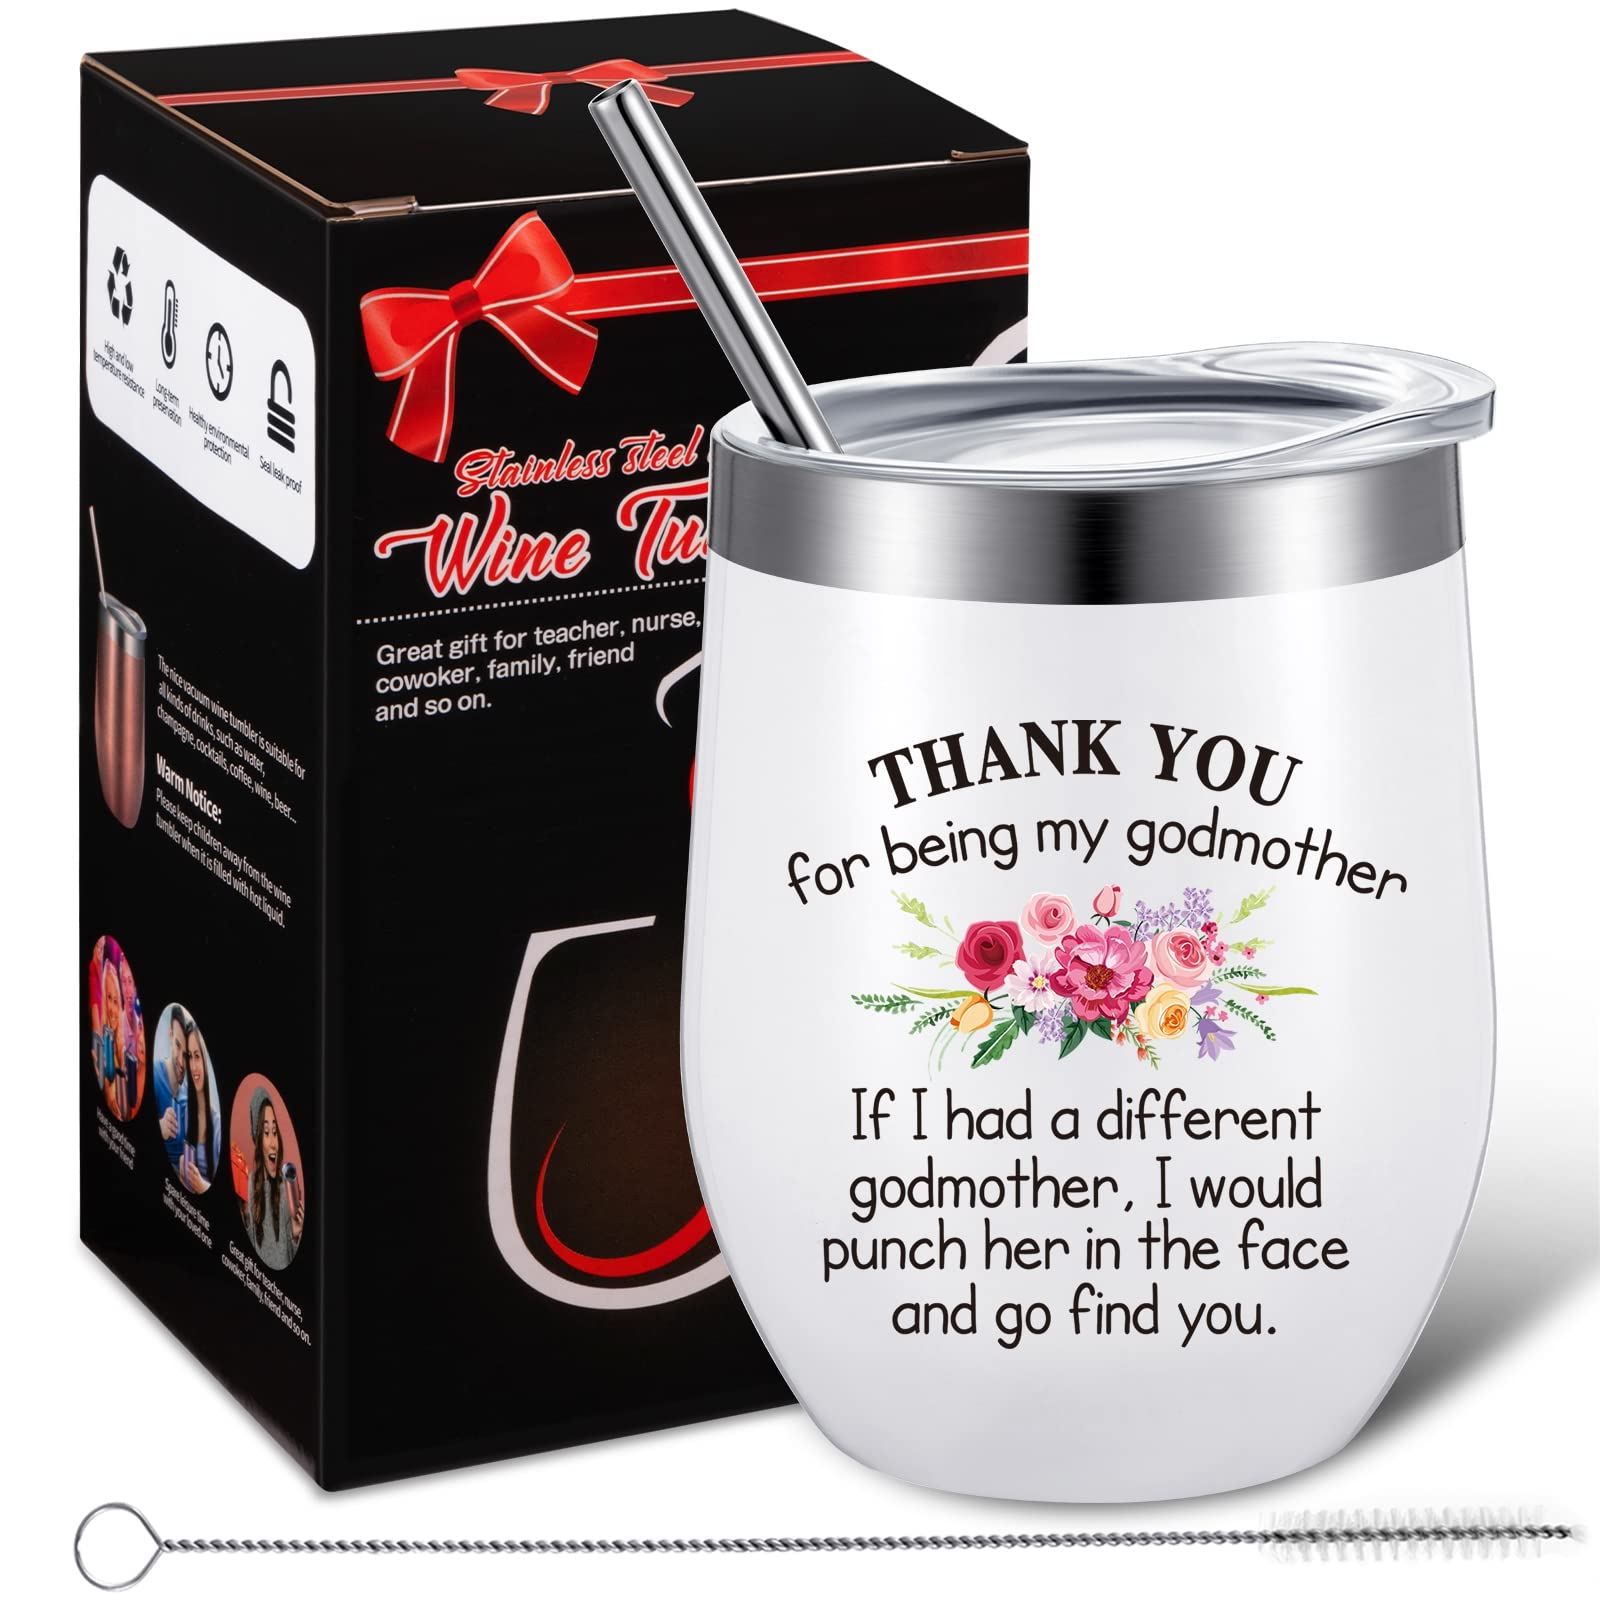 Godmother Gifts from Godchild, Thank You for Being My Godmother Wine Tumbler Promoted to Godmother Gift for Baby Pregnancy Announcement Christmas,12 oz Stainless Steel Coffee Mug with Lid Straw Brush